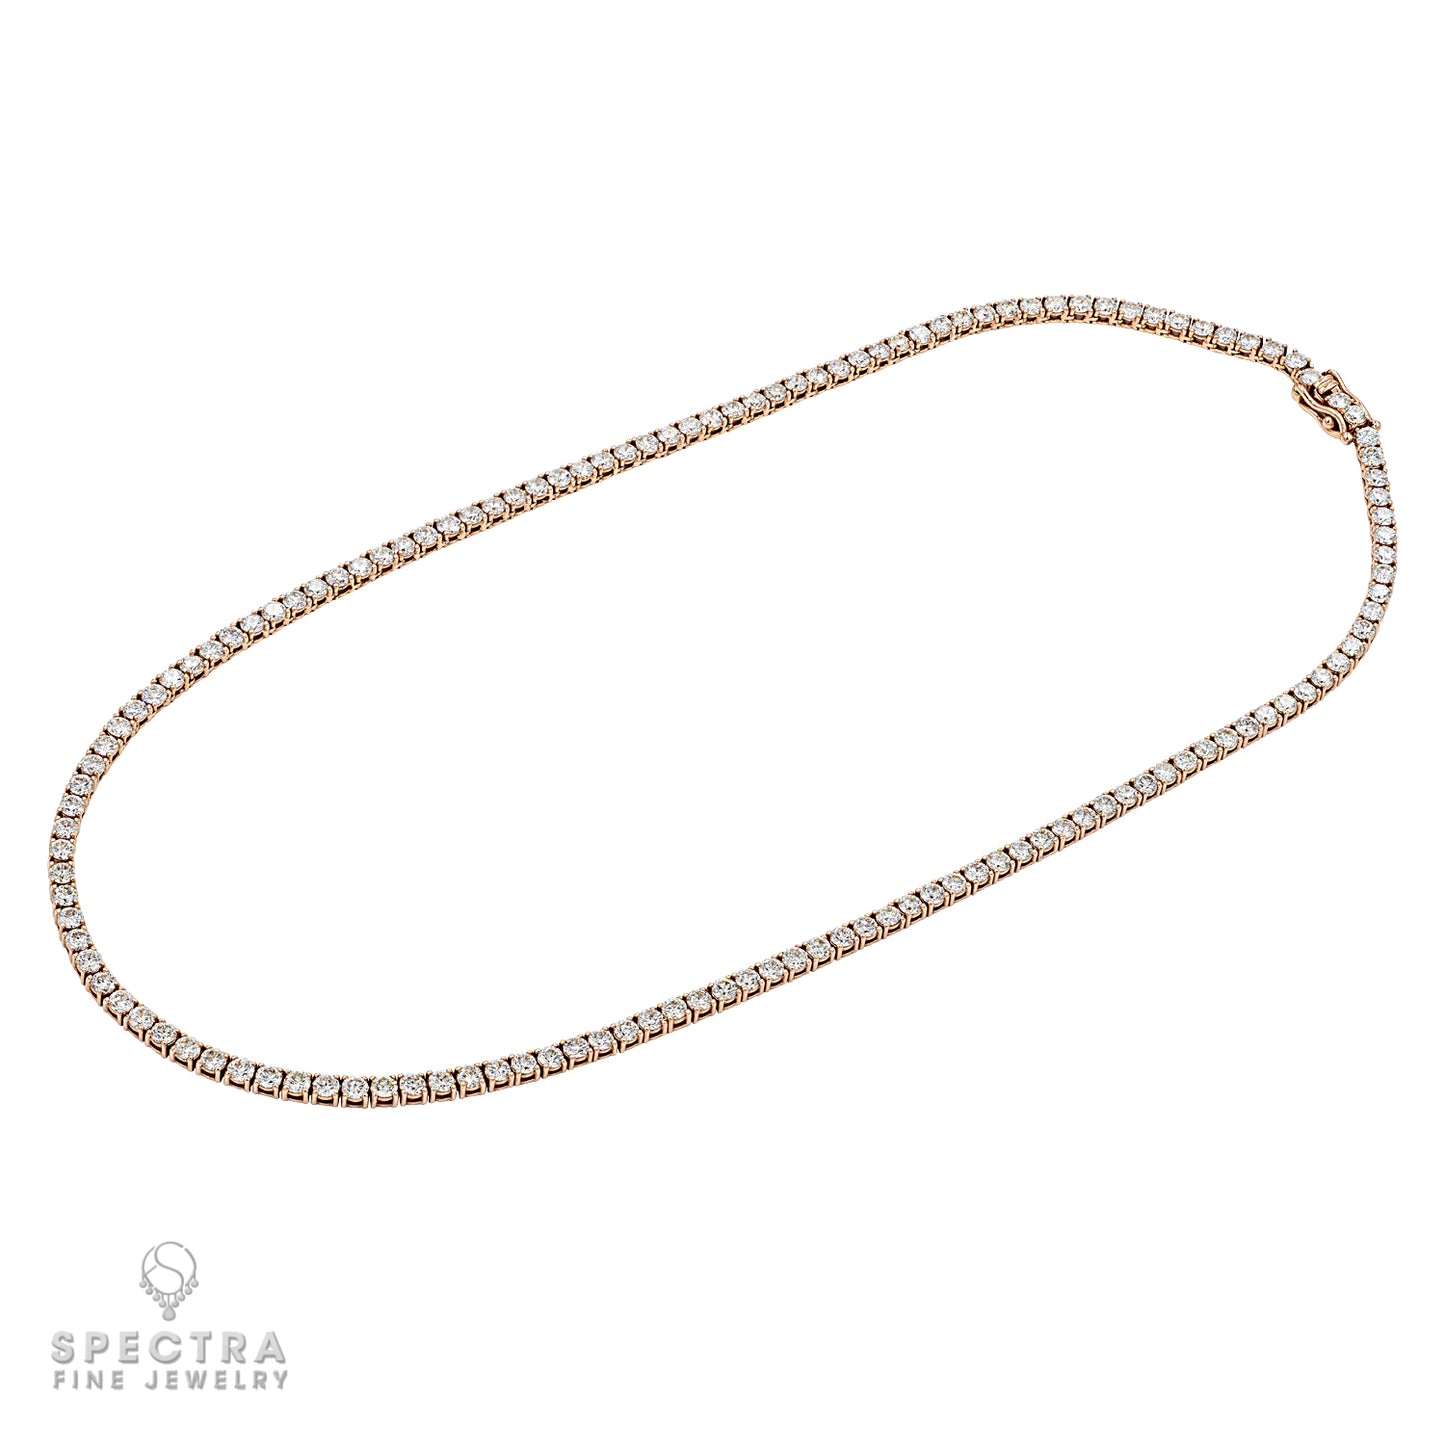 11.82ct Diamond and 14kt Rose Gold Tennis Necklace